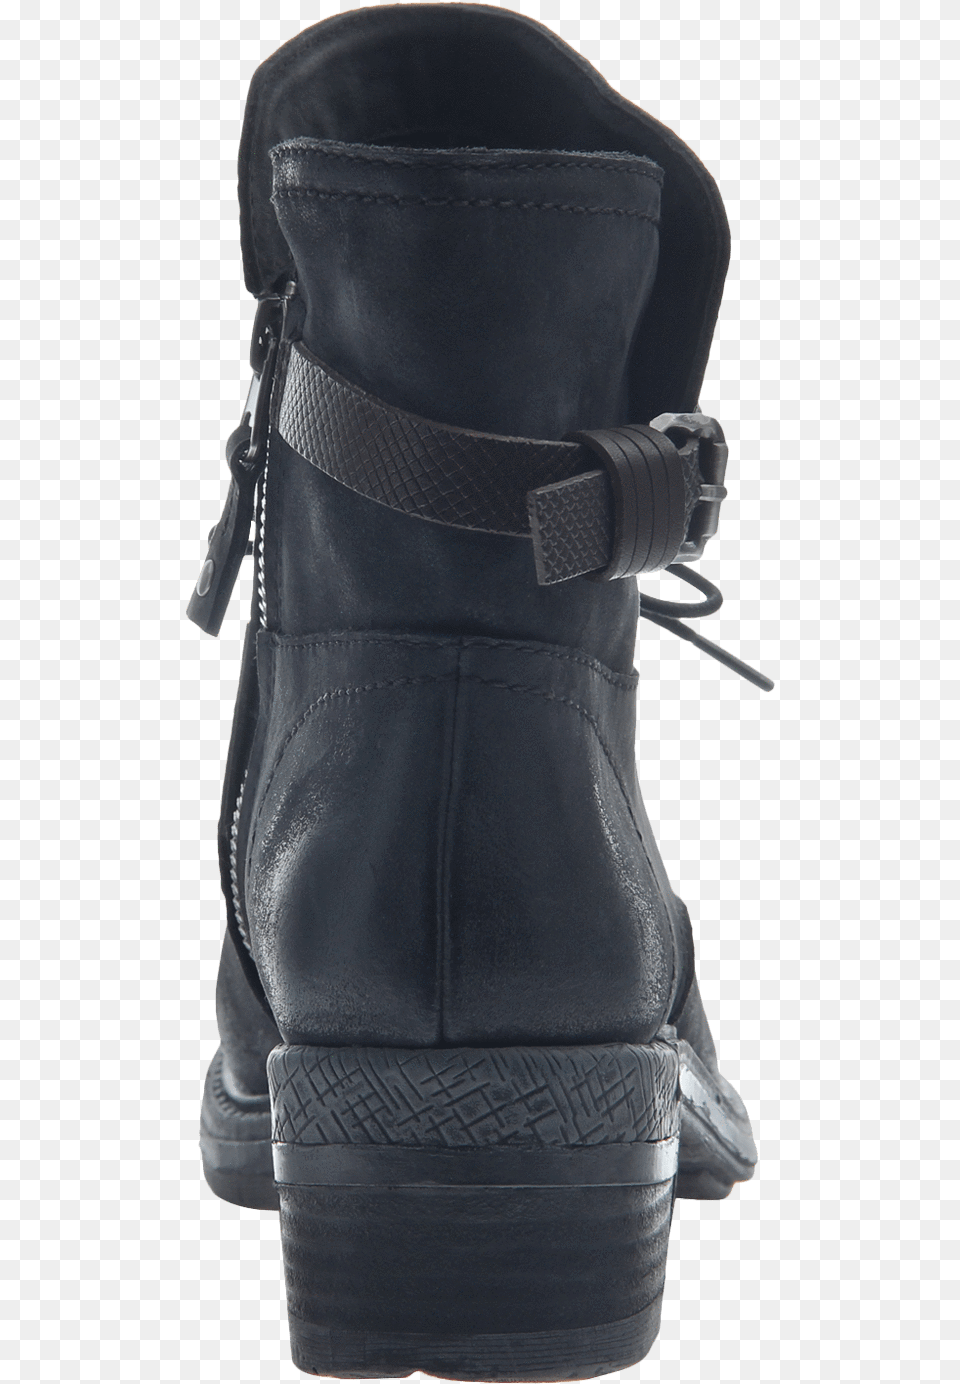 Gallivant Women39s Boot In Black Back View Motorcycle Boot, Accessories, Clothing, Footwear, Person Png